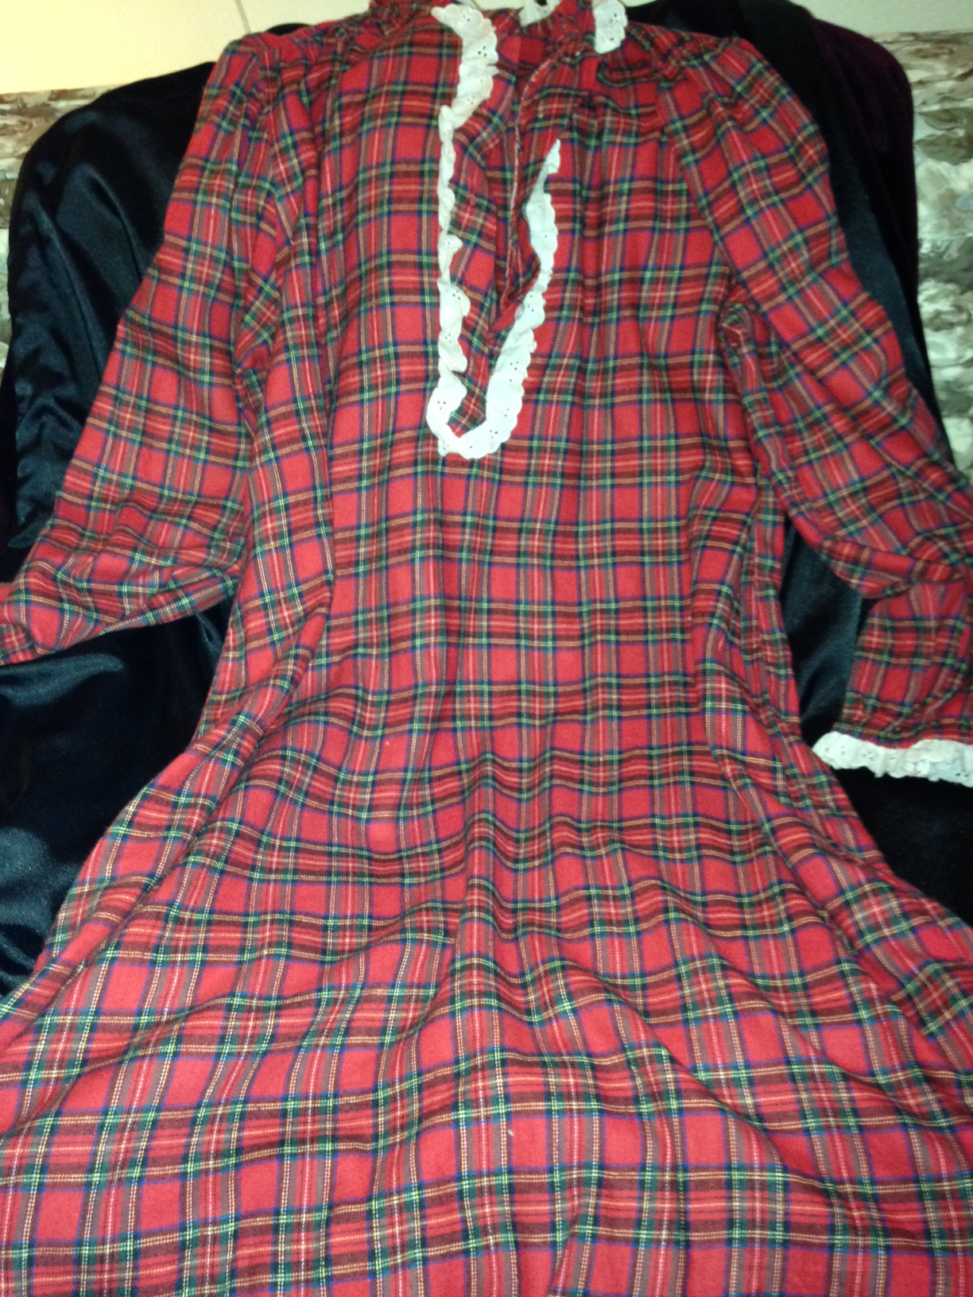 Red plaid nightgown with white piping down the front.